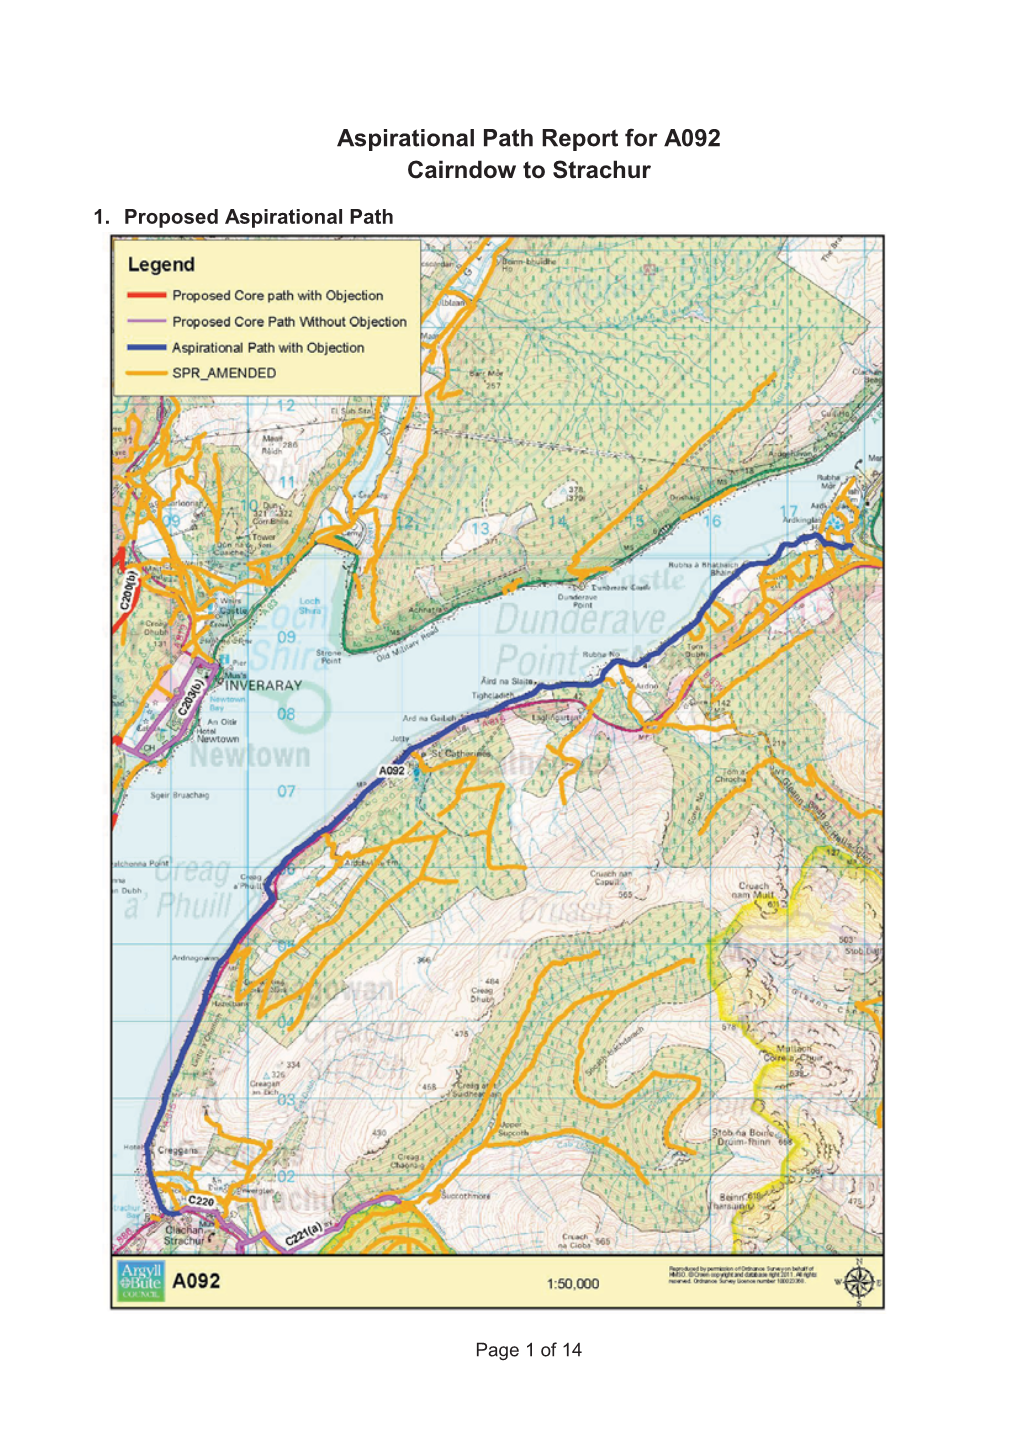 Aspirational Path Report for A092 Cairndow to Strachur